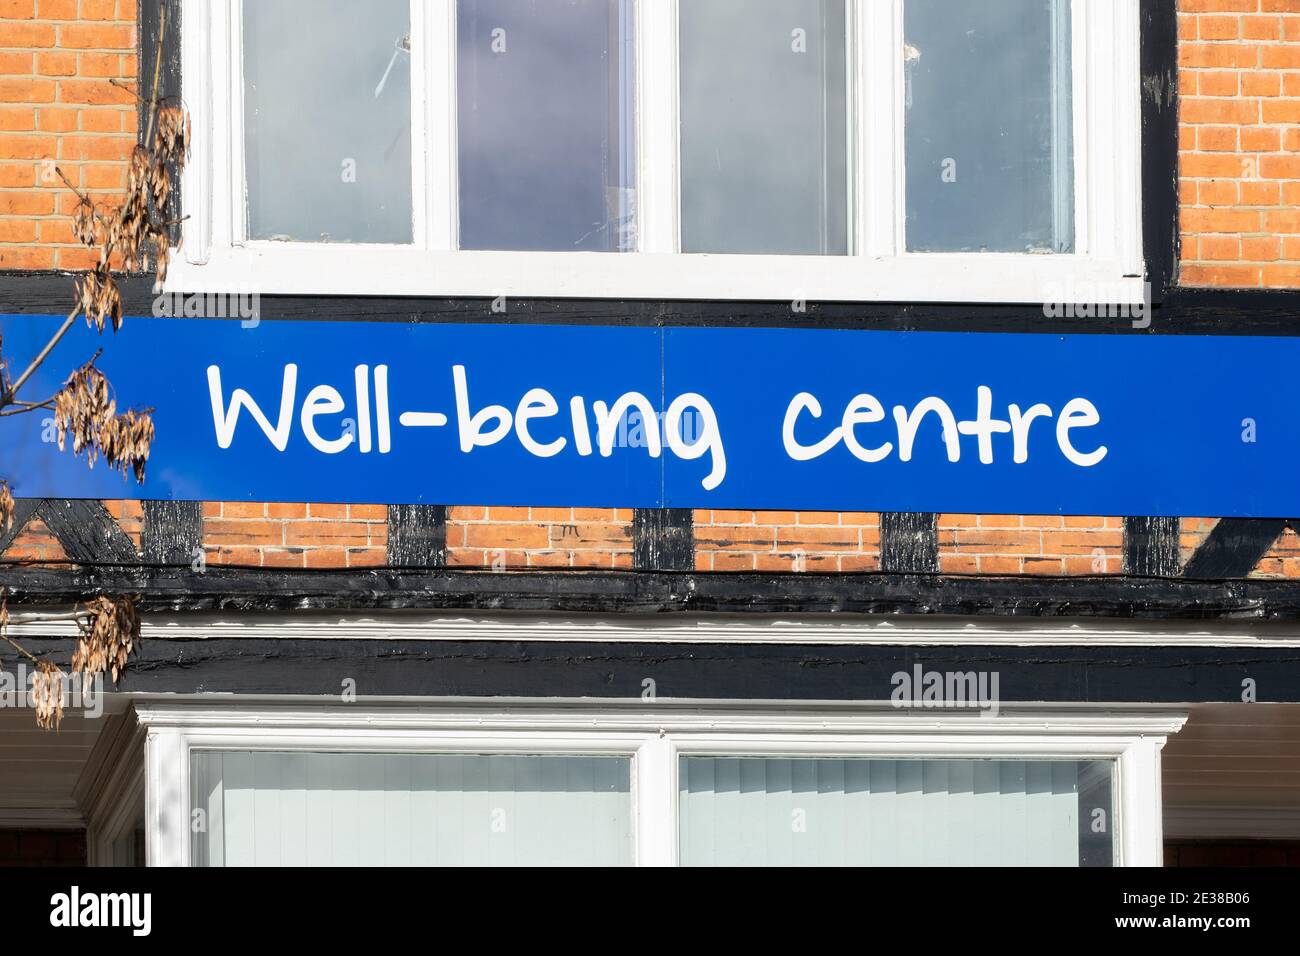 Well-being centre providing help with mental health problems, UK Stock Photo